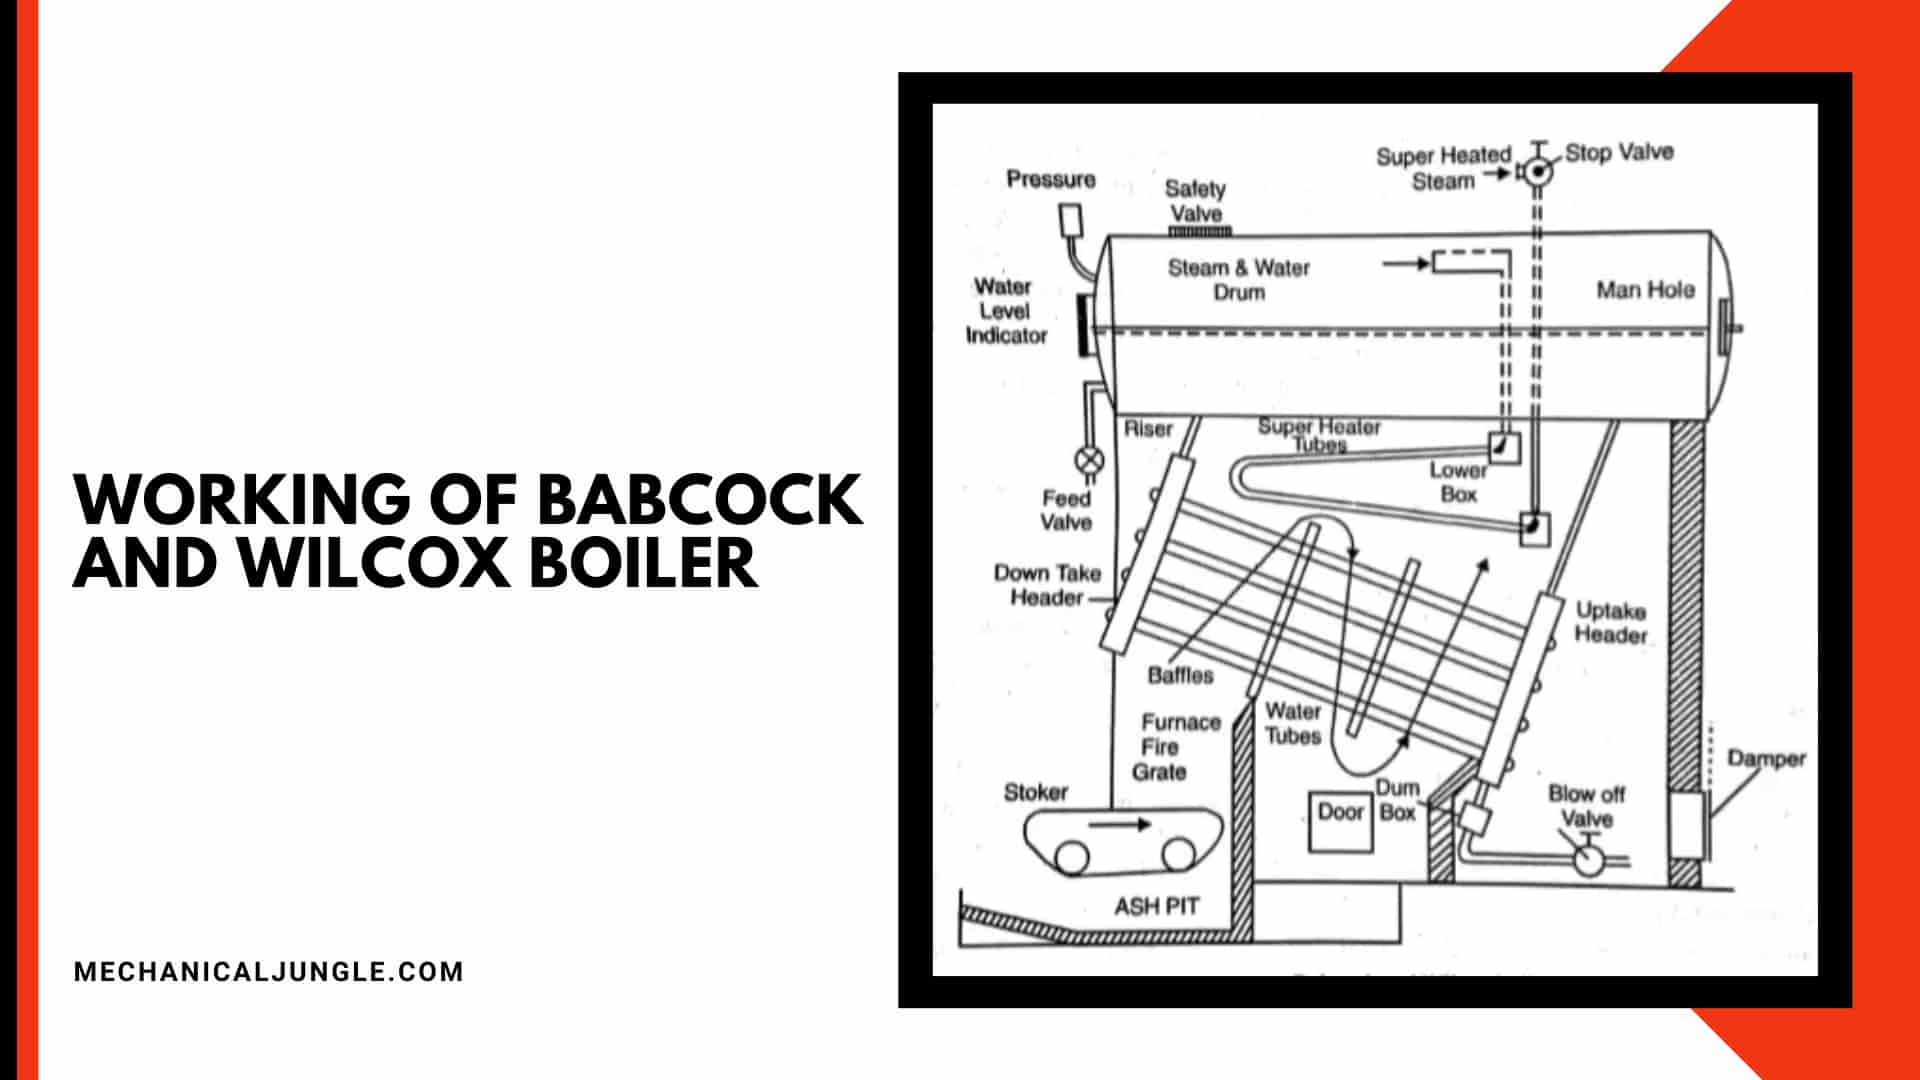 Working of Babcock and Wilcox Boiler